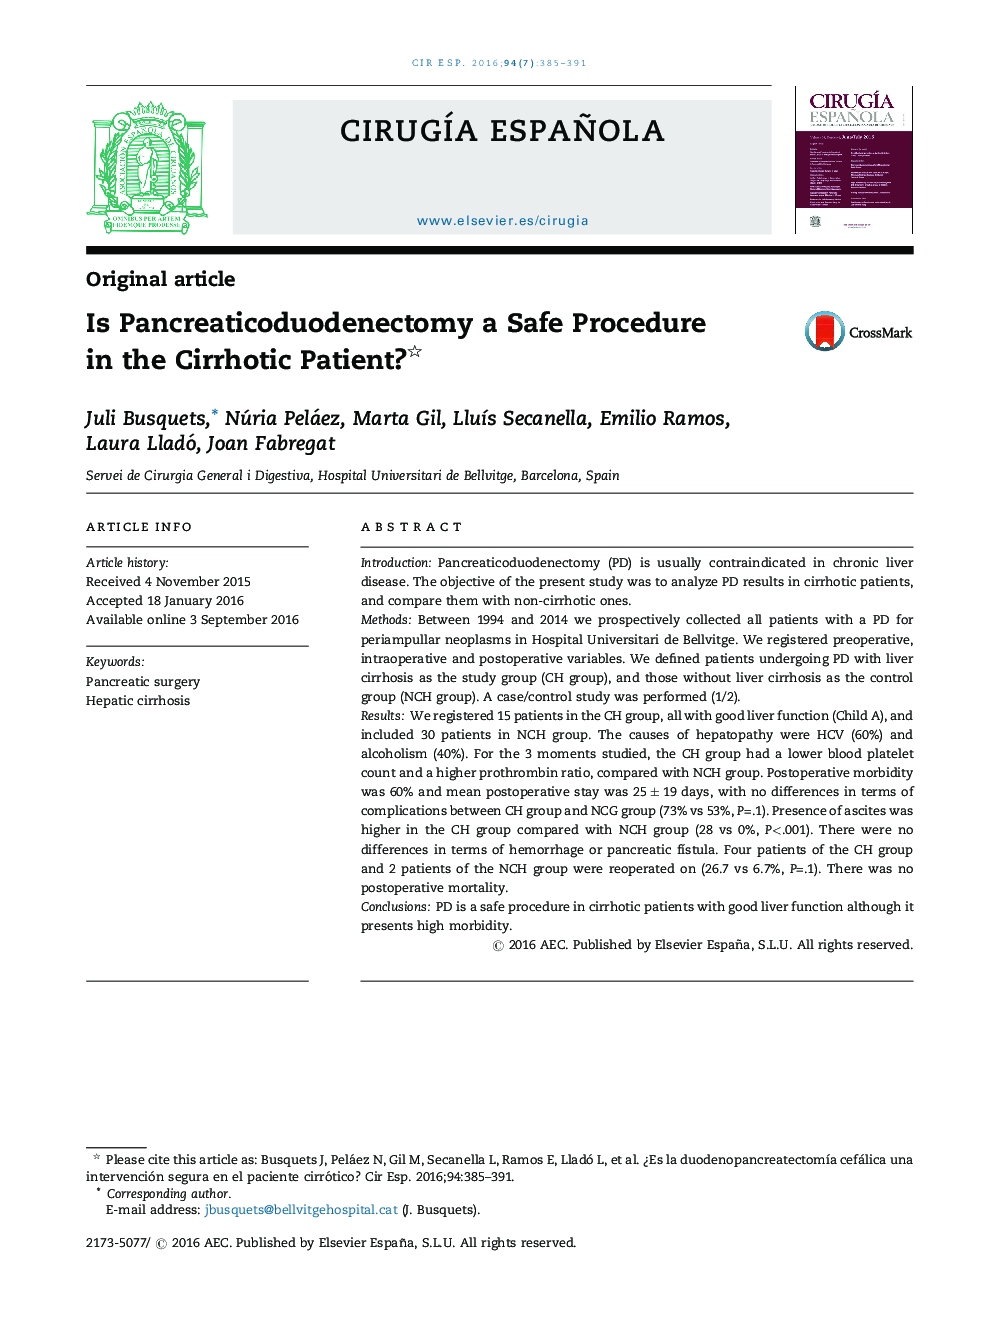 Is Pancreaticoduodenectomy a Safe Procedure in the Cirrhotic Patient? 